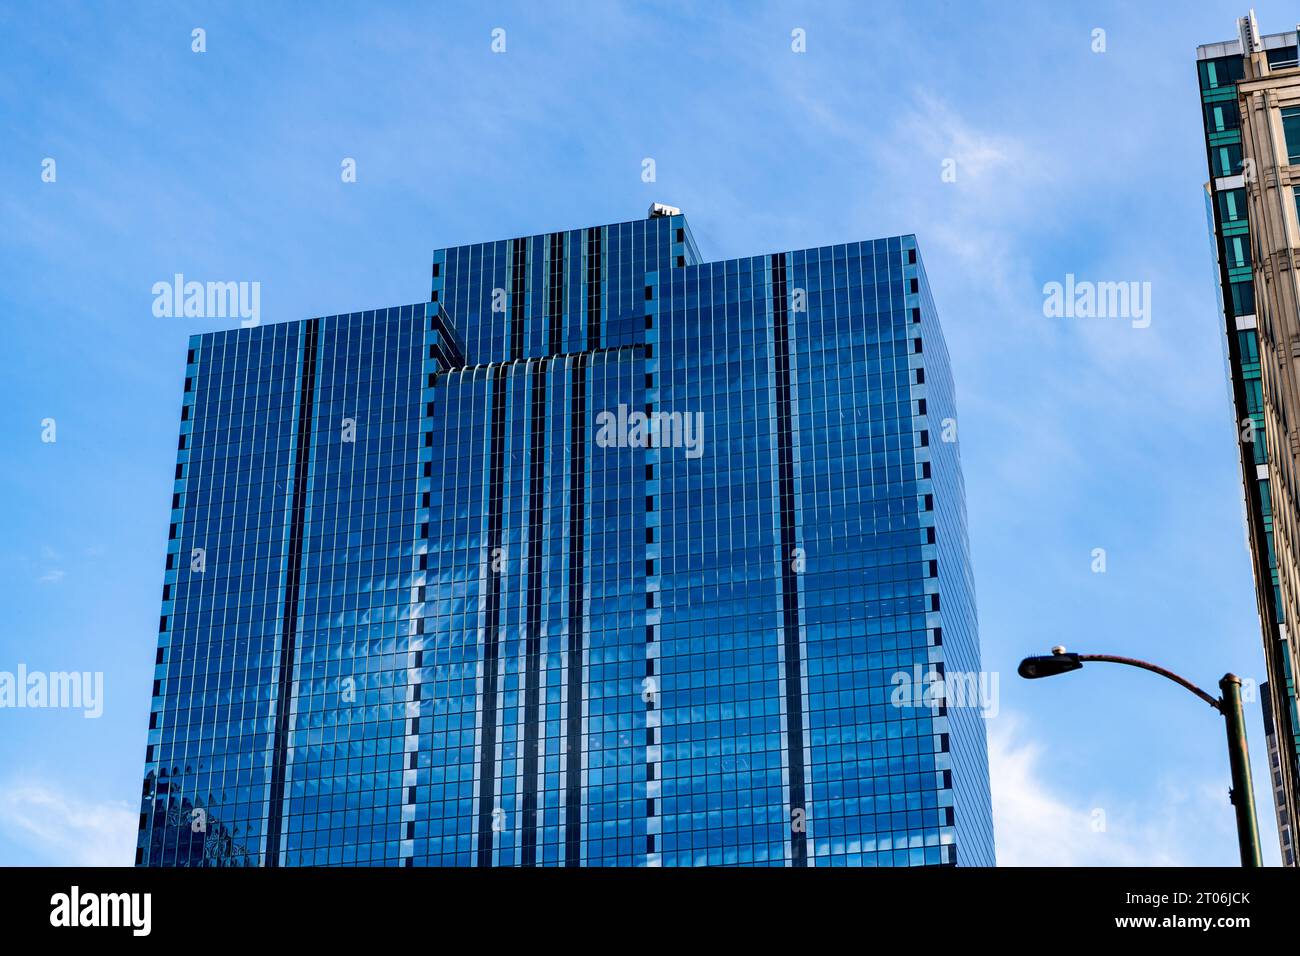 city downtown with skyscraper. office building in business district. skyscraper building architecture. skyscraper with glassy facade and exterior. mod Stock Photo